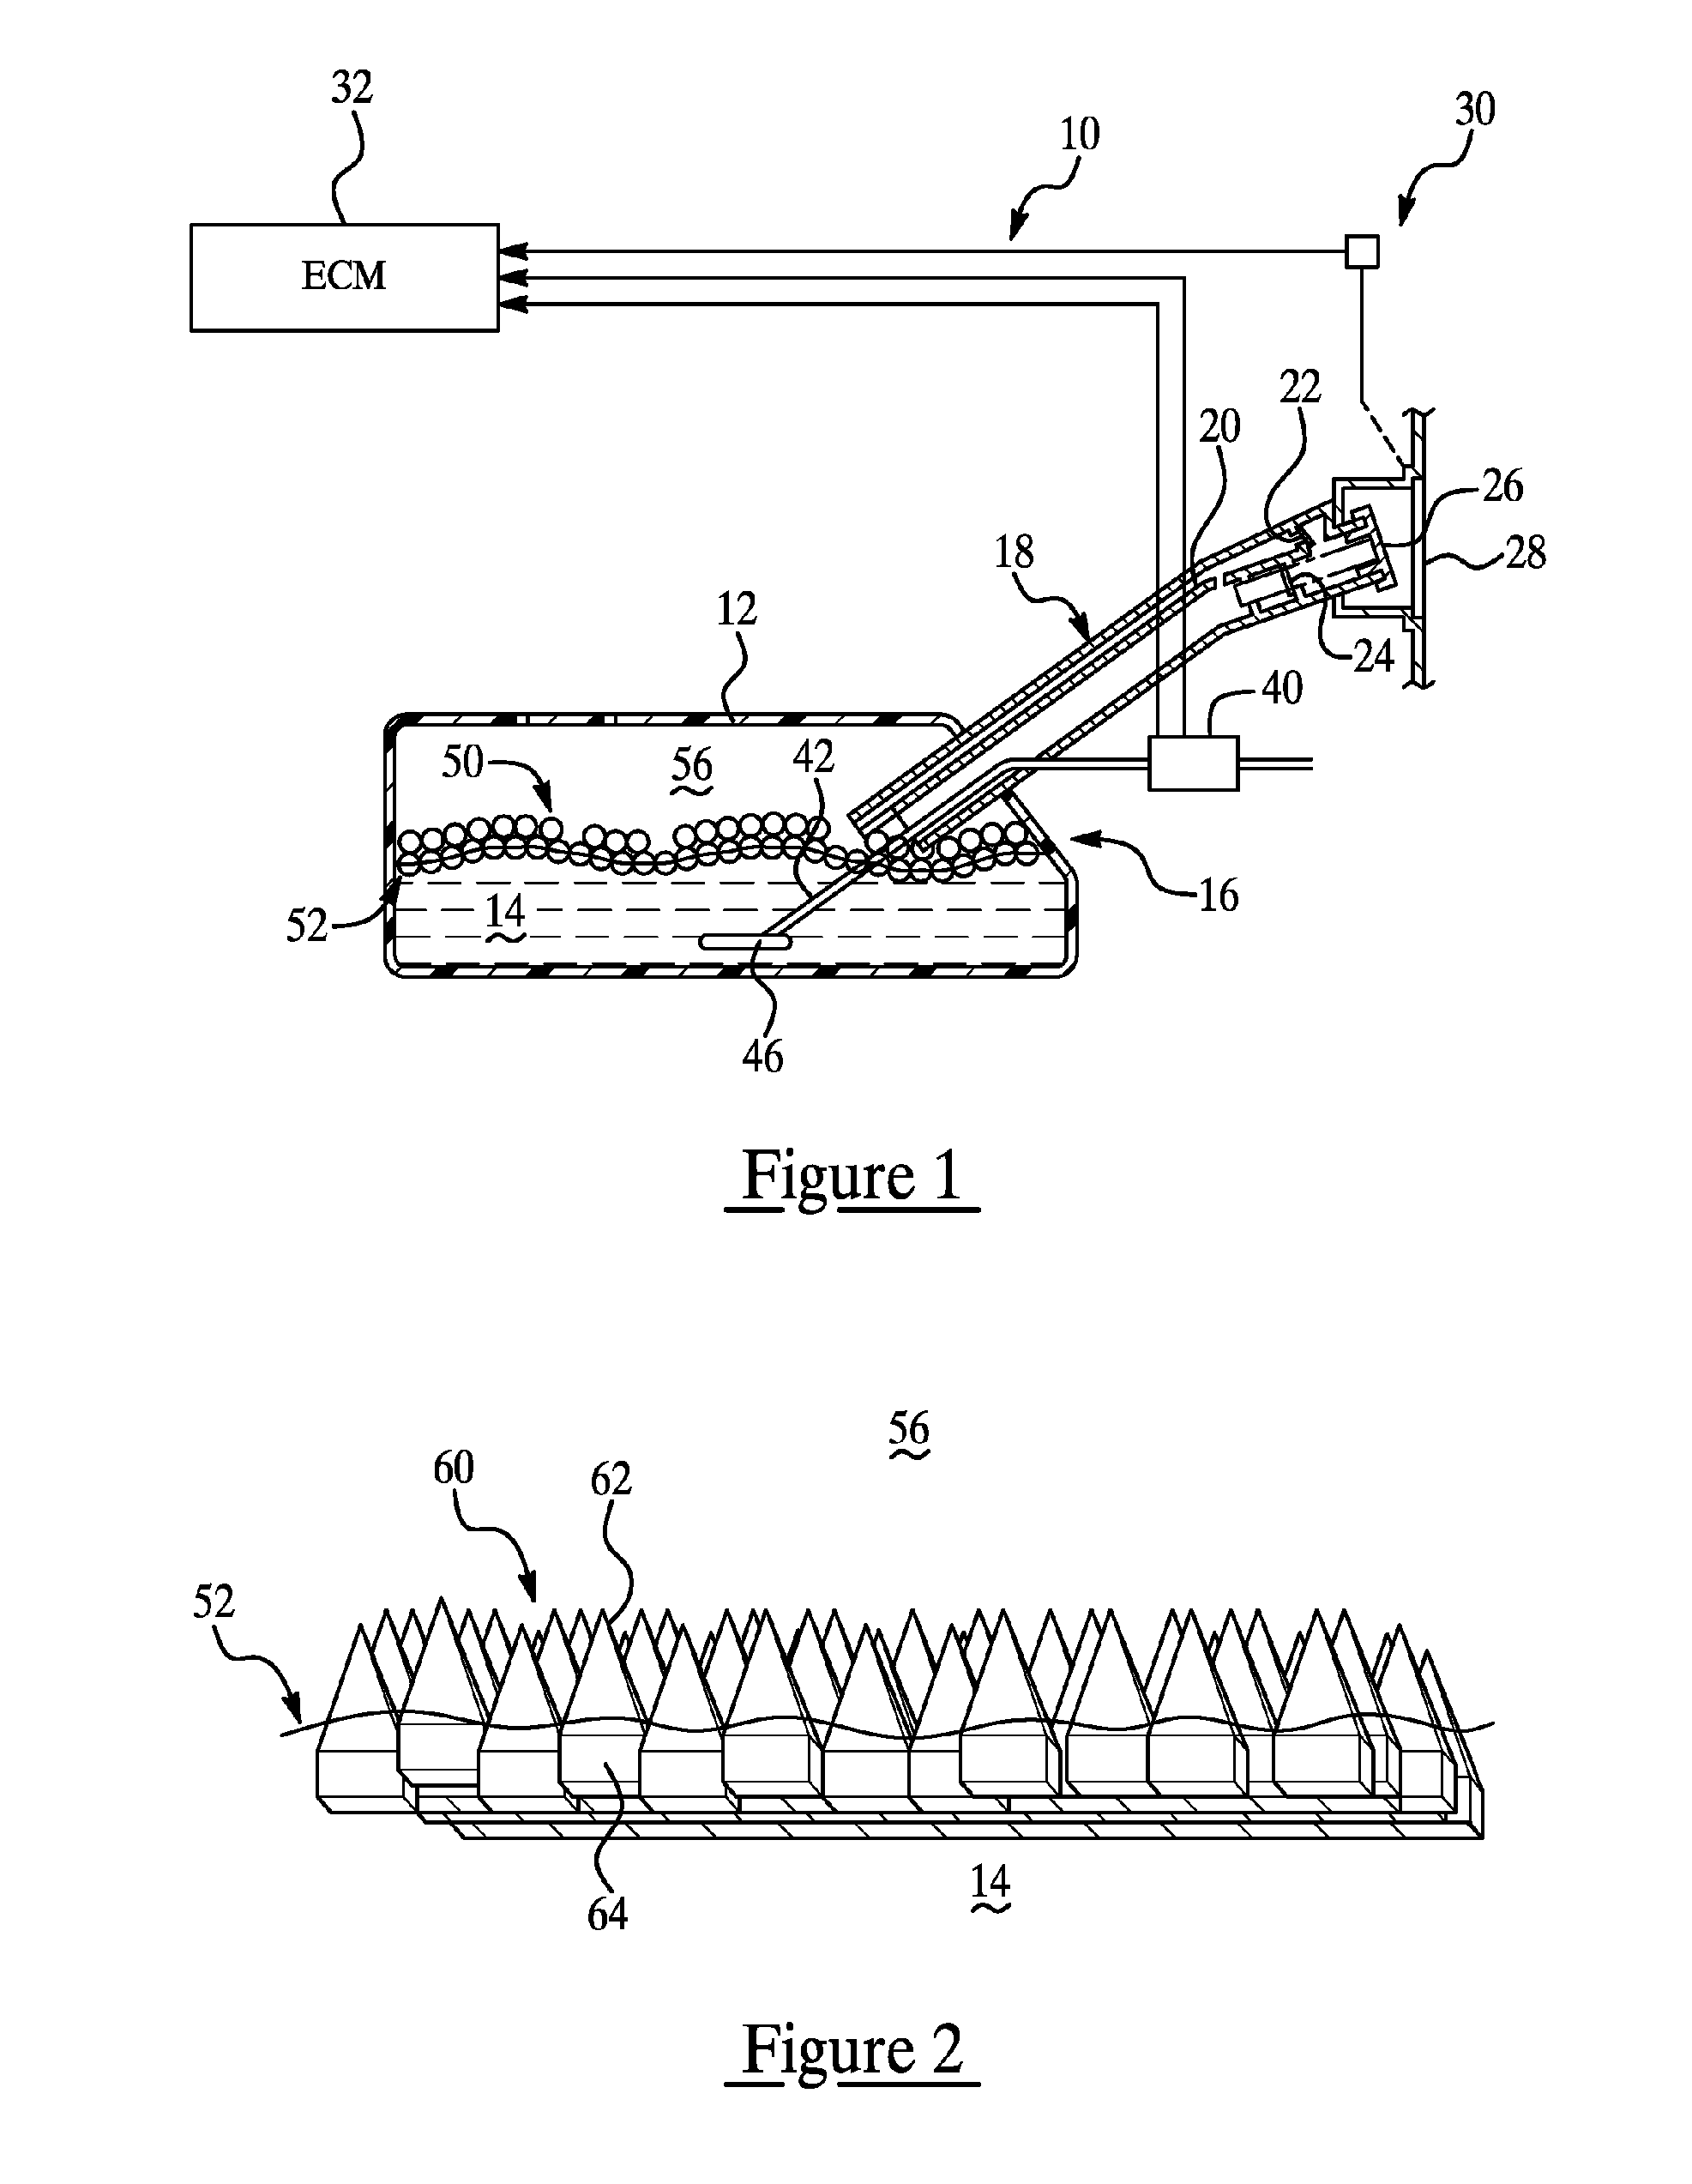 Fuel vapor management for stored fuel using floating particles